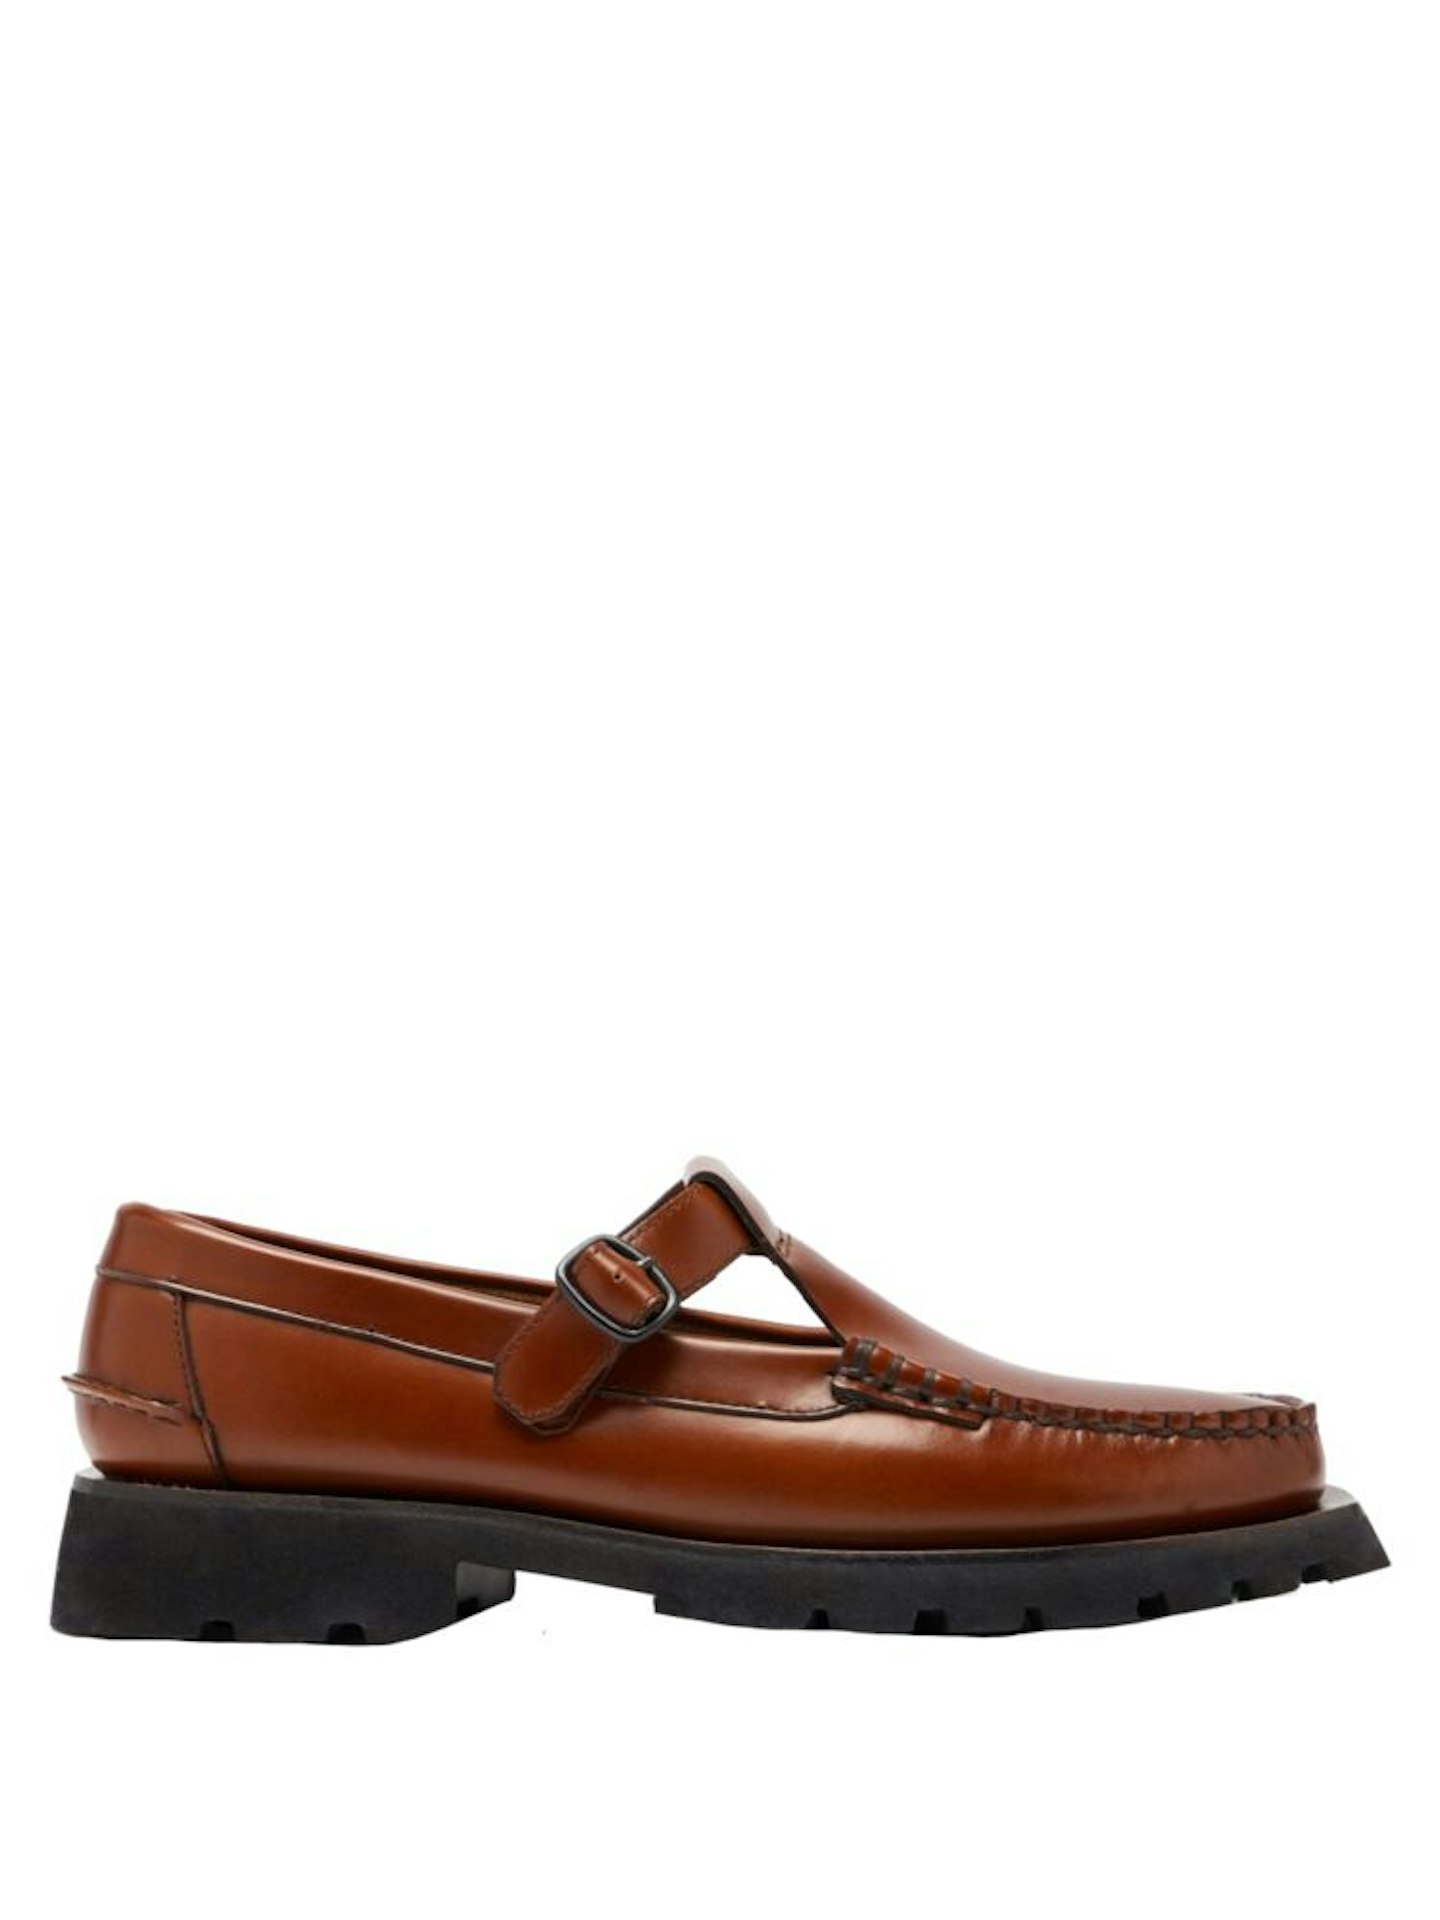 Hereu, Alber Tread-Sole T-Bar Leather Loafers, £315